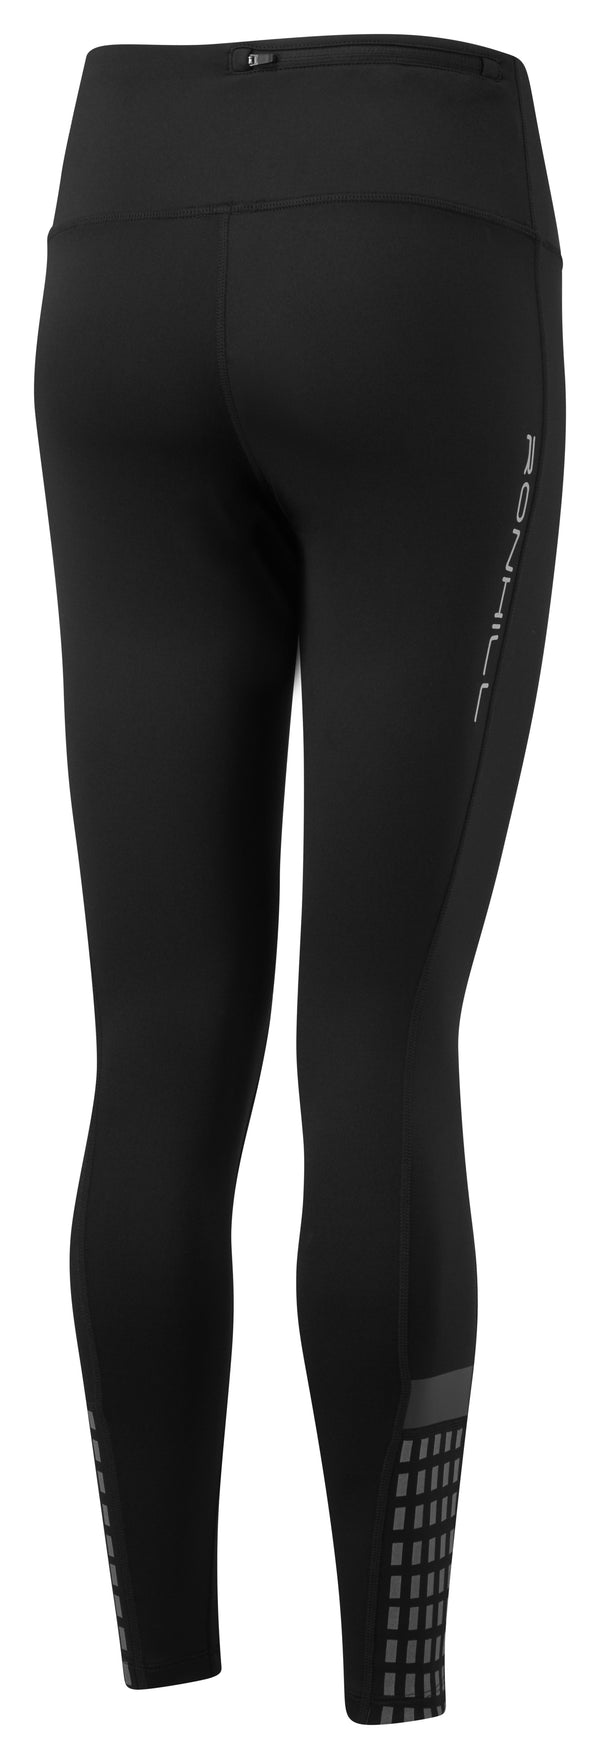 RonHill | Wmn's Tech Afterhours Tight | Black/Charcoal/Reflect | M